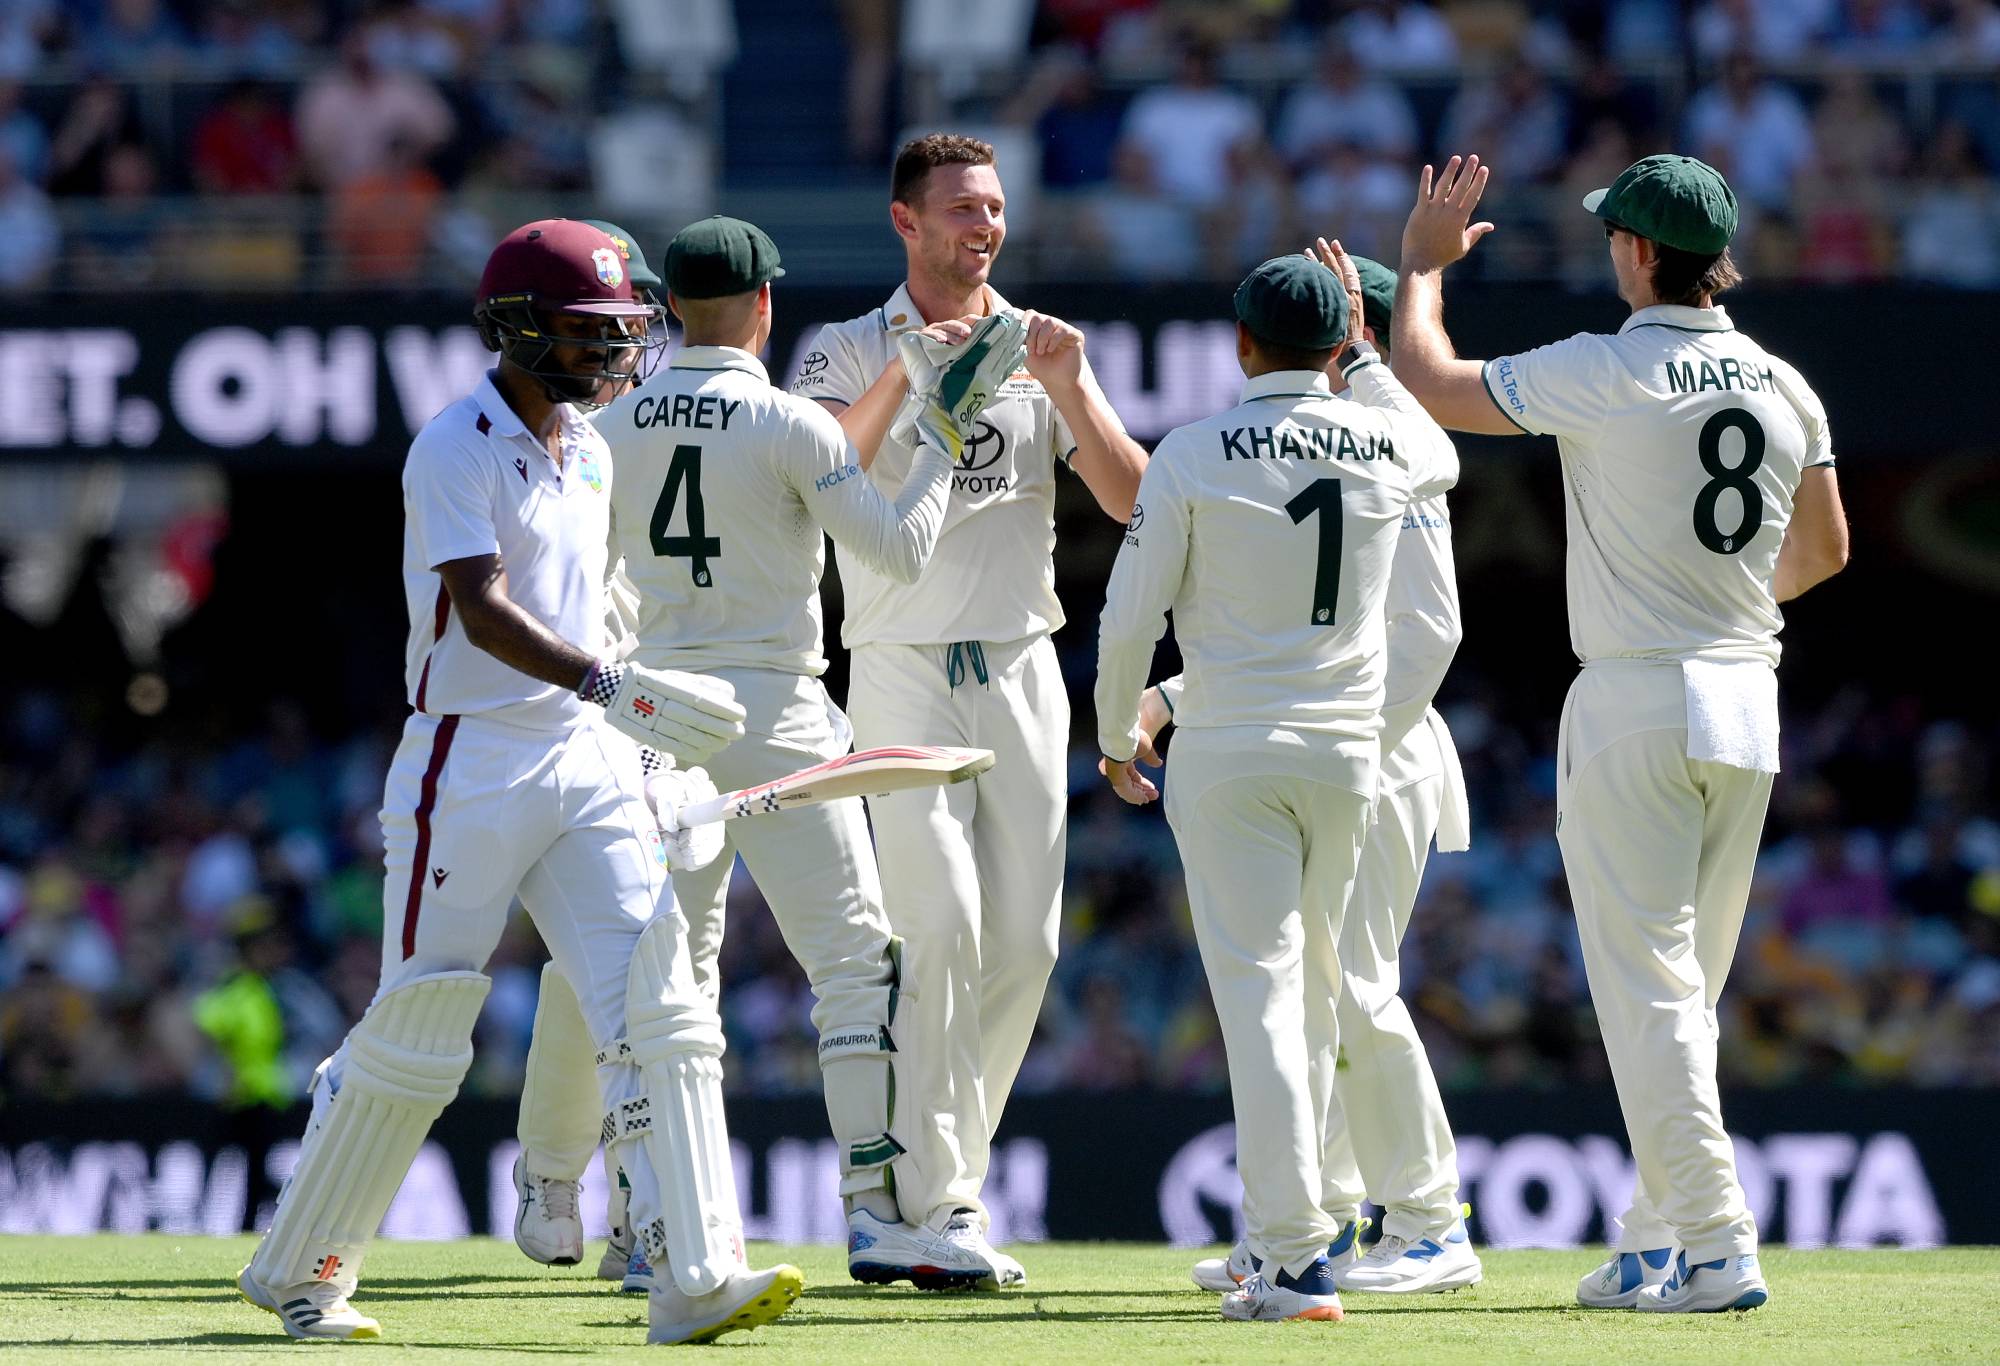 BRISBANE, AUSTRALIA - JANUARY 25: Josh Hazlewood of Australia celebrates with team mates after taking the wicket of Kraigg Brathwaite of the West Indies during day one of the Second Test match in the series between Australia and West Indies at The Gabba on January 25, 2024 in Brisbane, Australia.